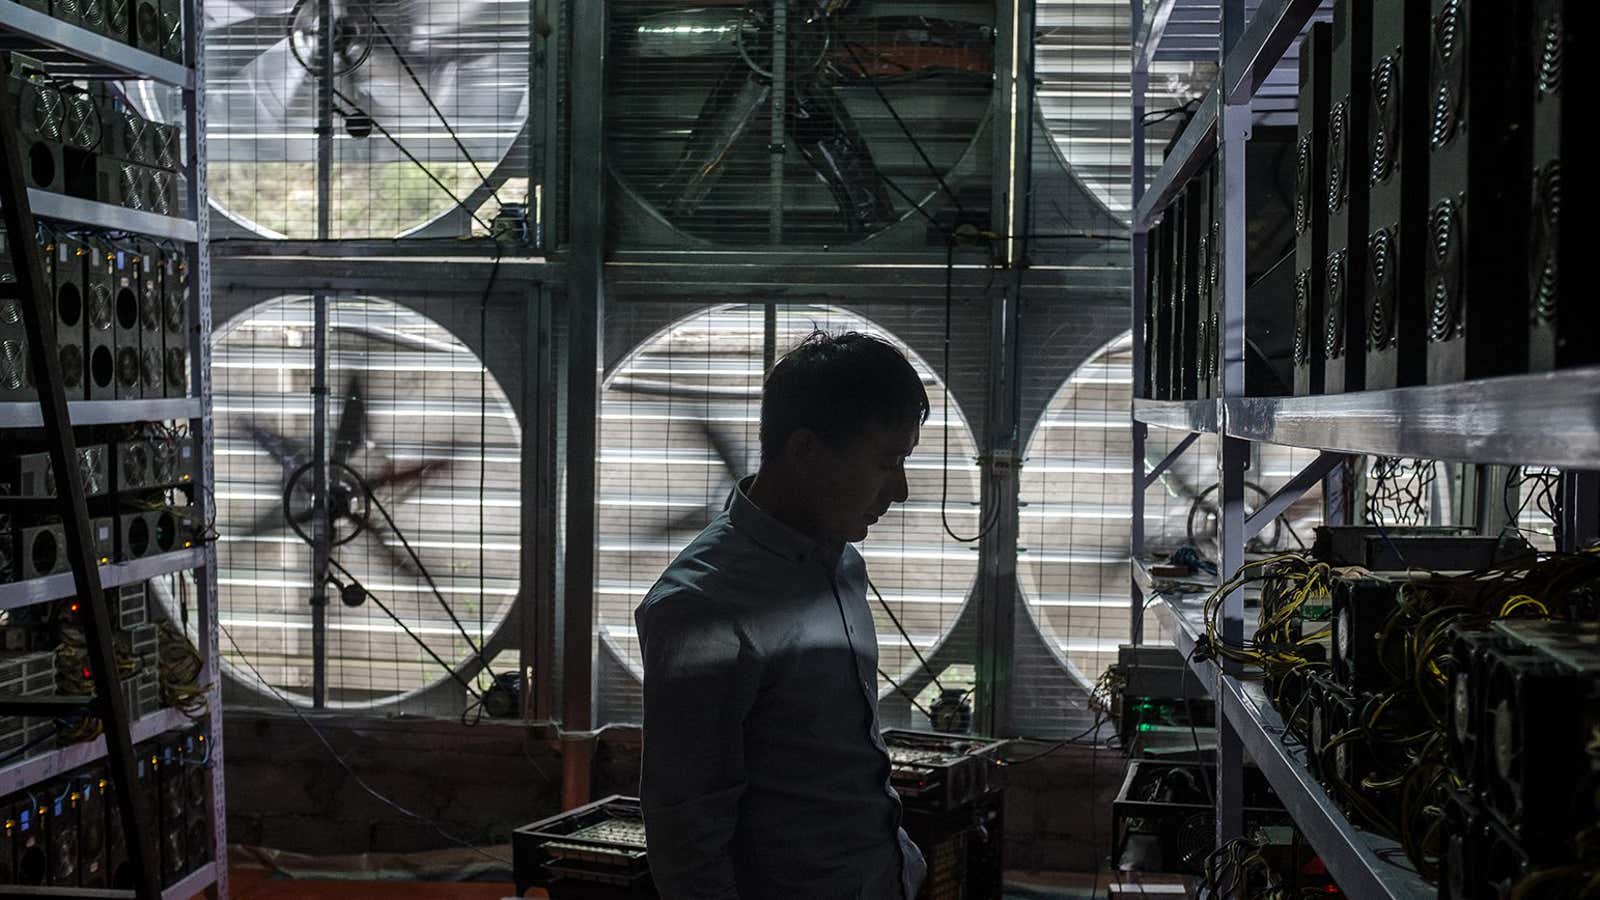 Bitcoin mine owner Liu, 29, stands in front of a wall of cooling fans at his mine where he houses and operates mining machines for miners who do not want to move to rural Sichuan.